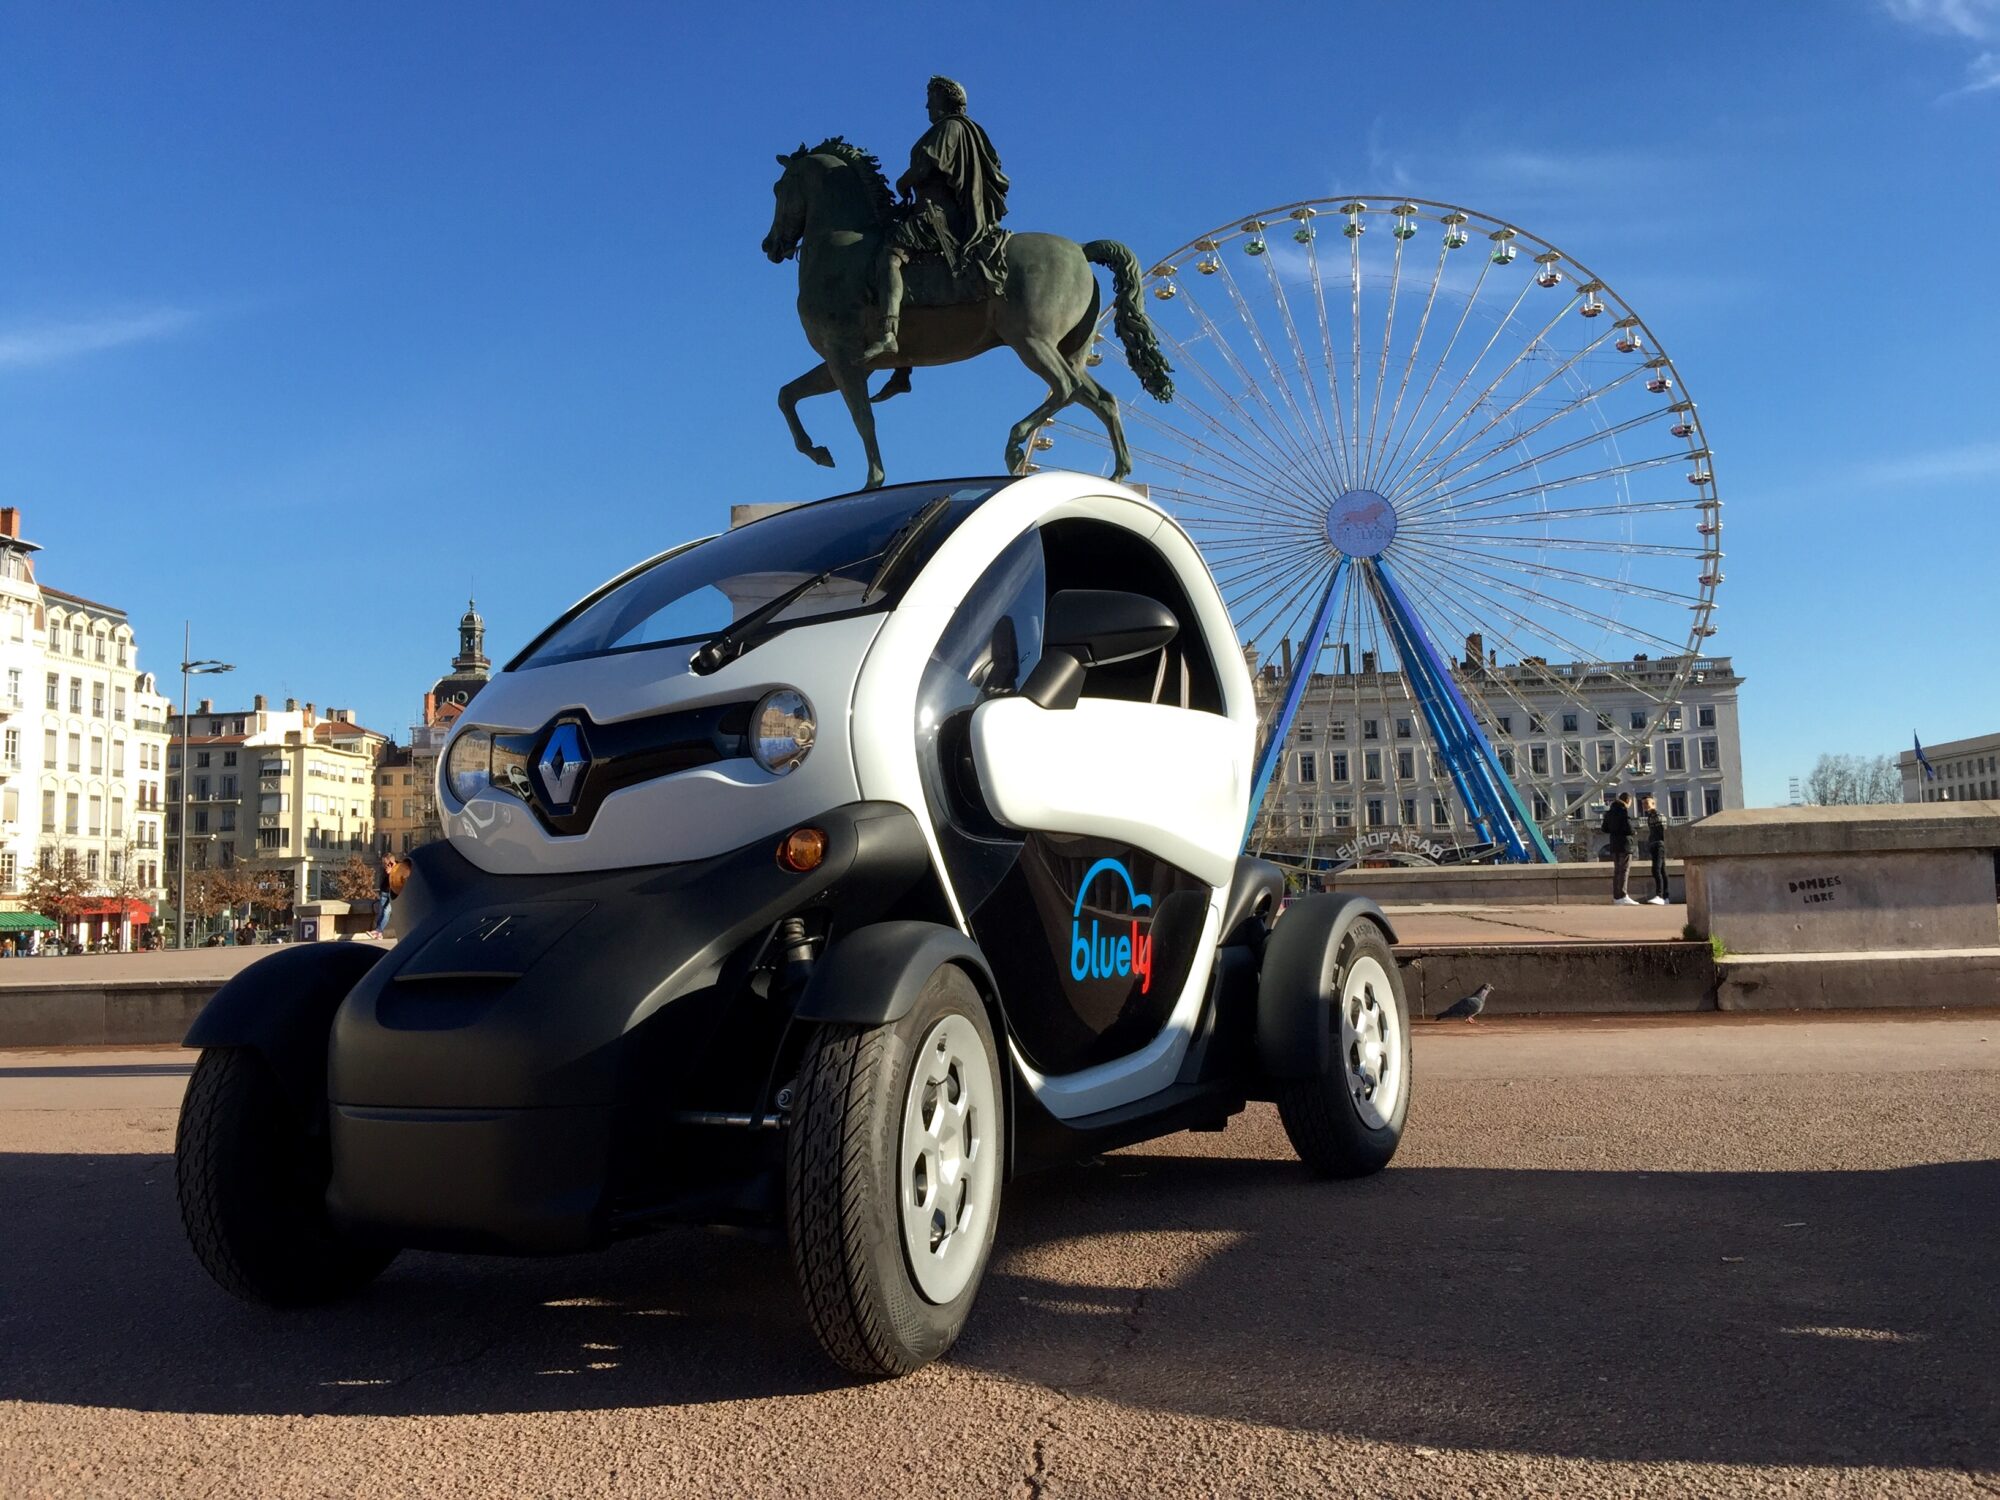 Primary Photo For: {67775, TWIZY DISPONIBILE IN CAR-SHARING BLUELY A LIONE}..jpeg